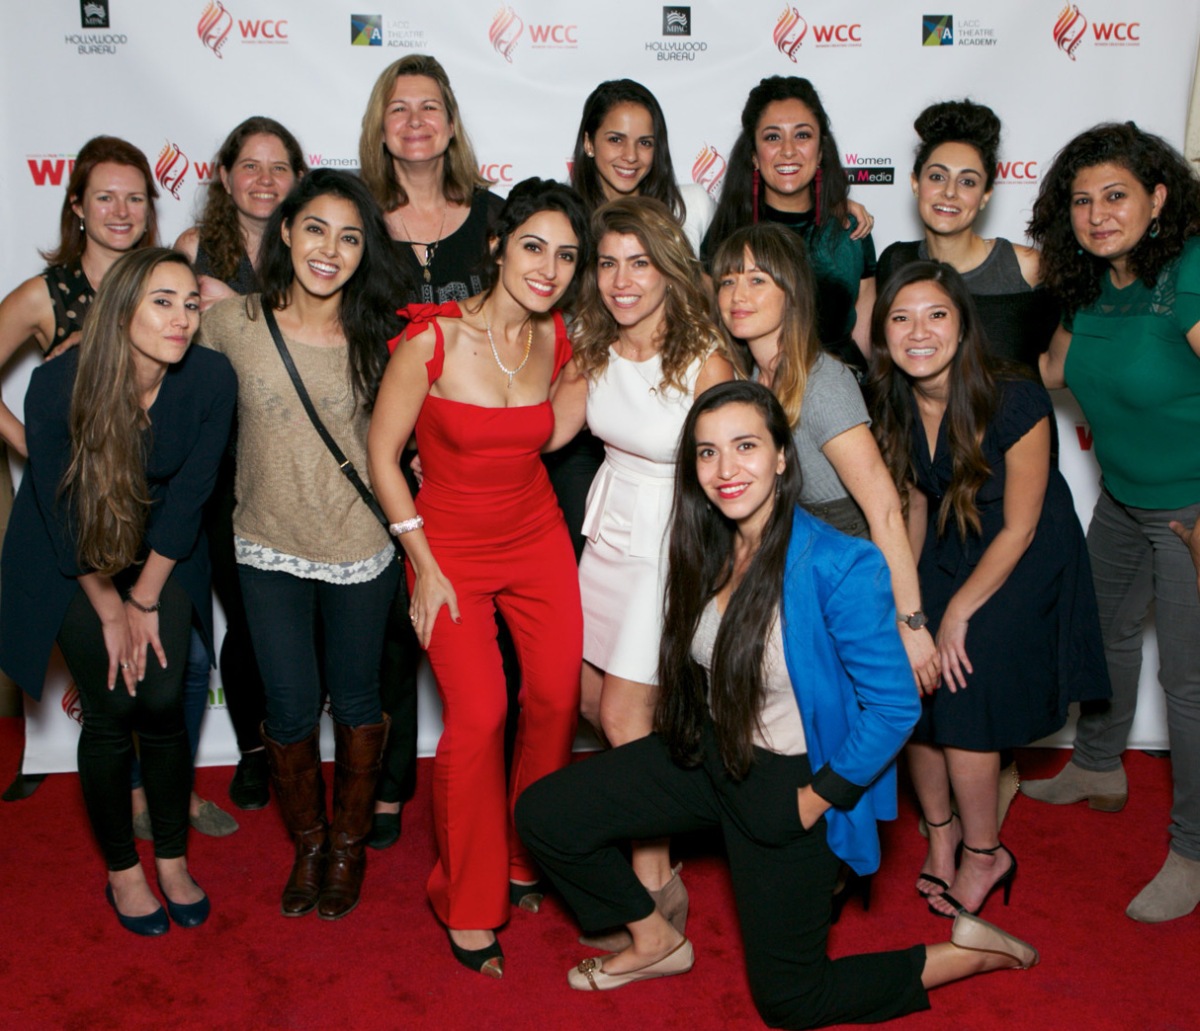 Women Creating Change To Host 2nd Annual “Stand Up 4 Her’ Charity Event